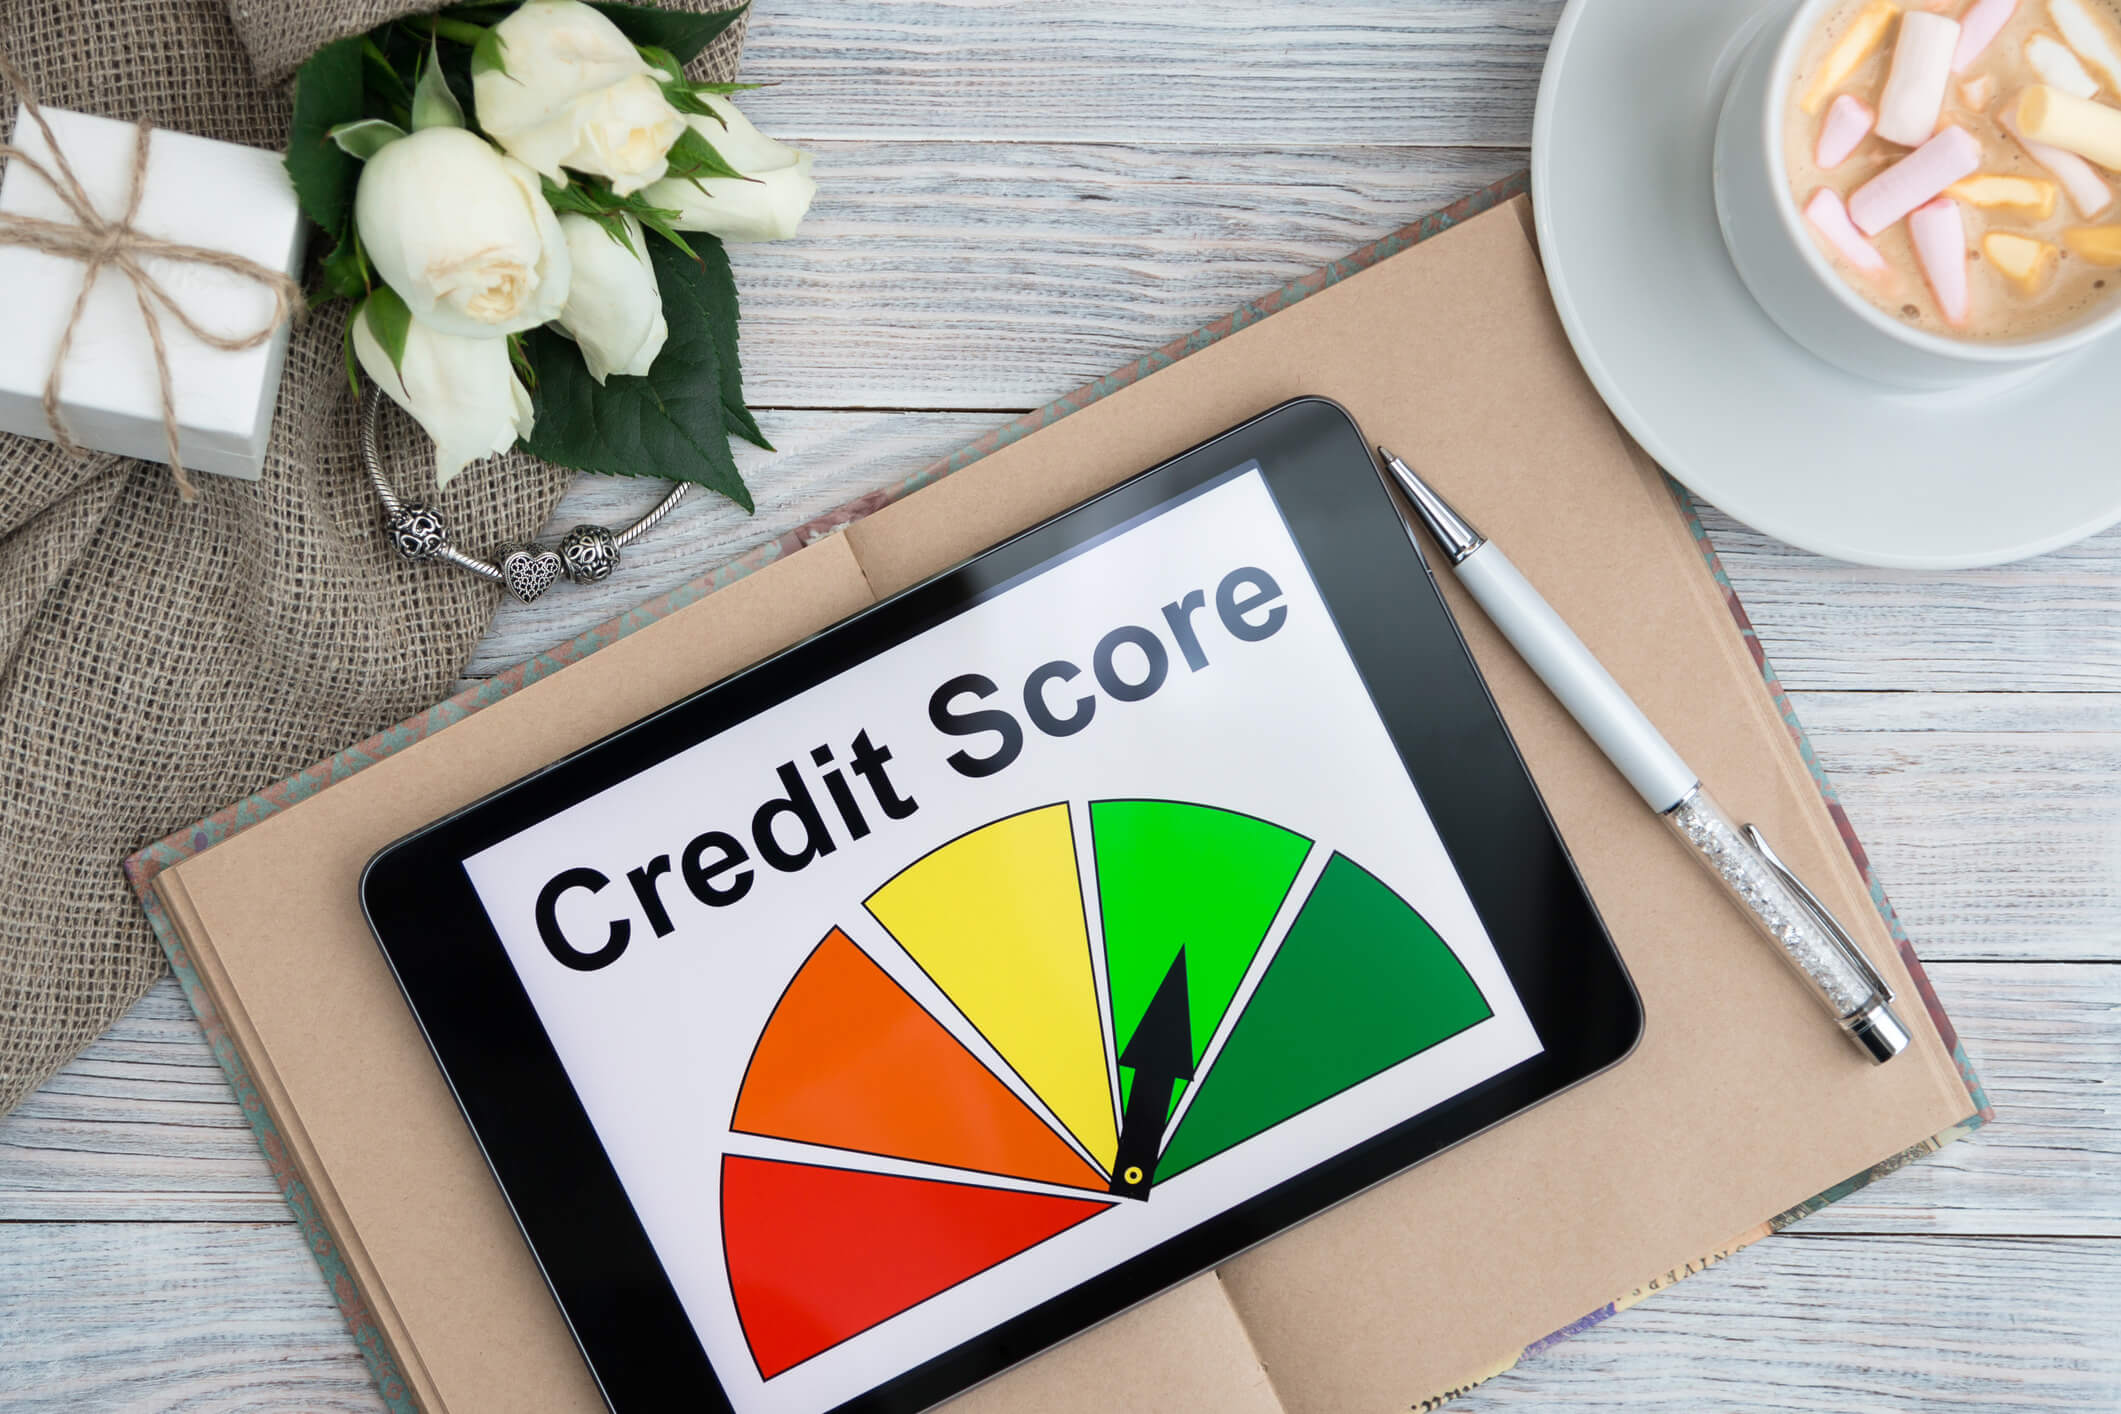 value of good credit score - Complete Controller